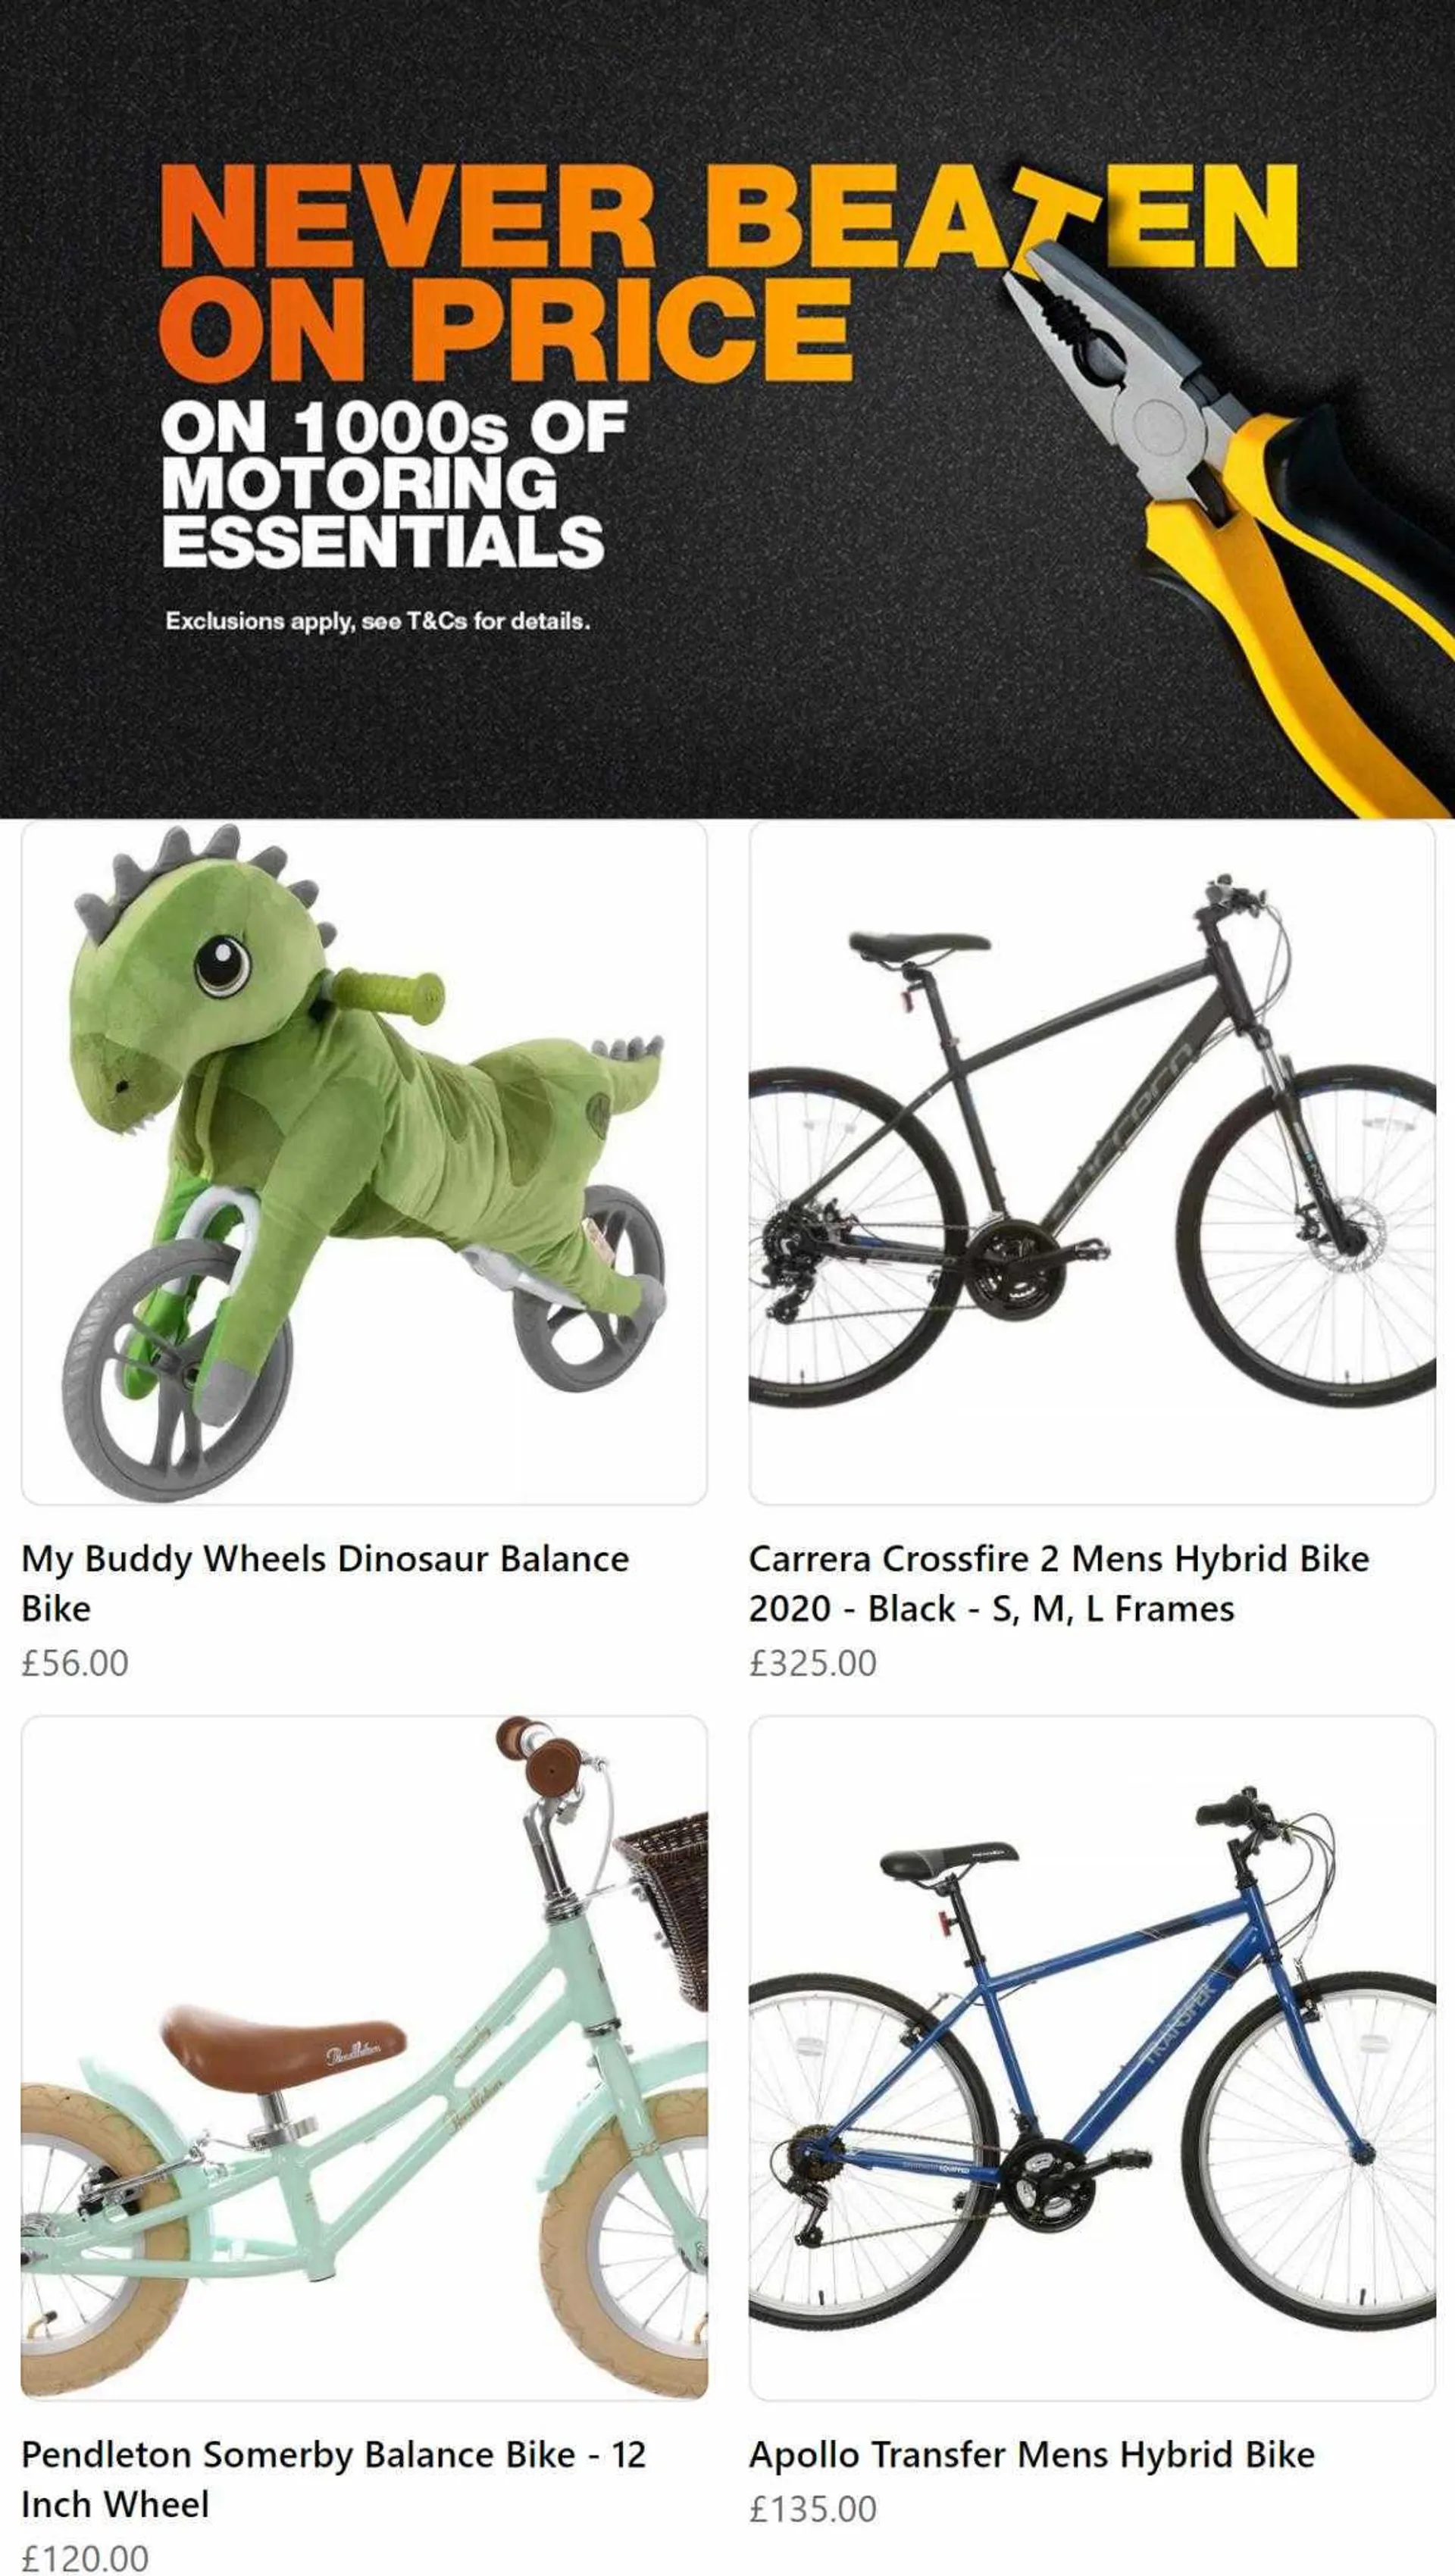 Halfords Weekly Offers - 2